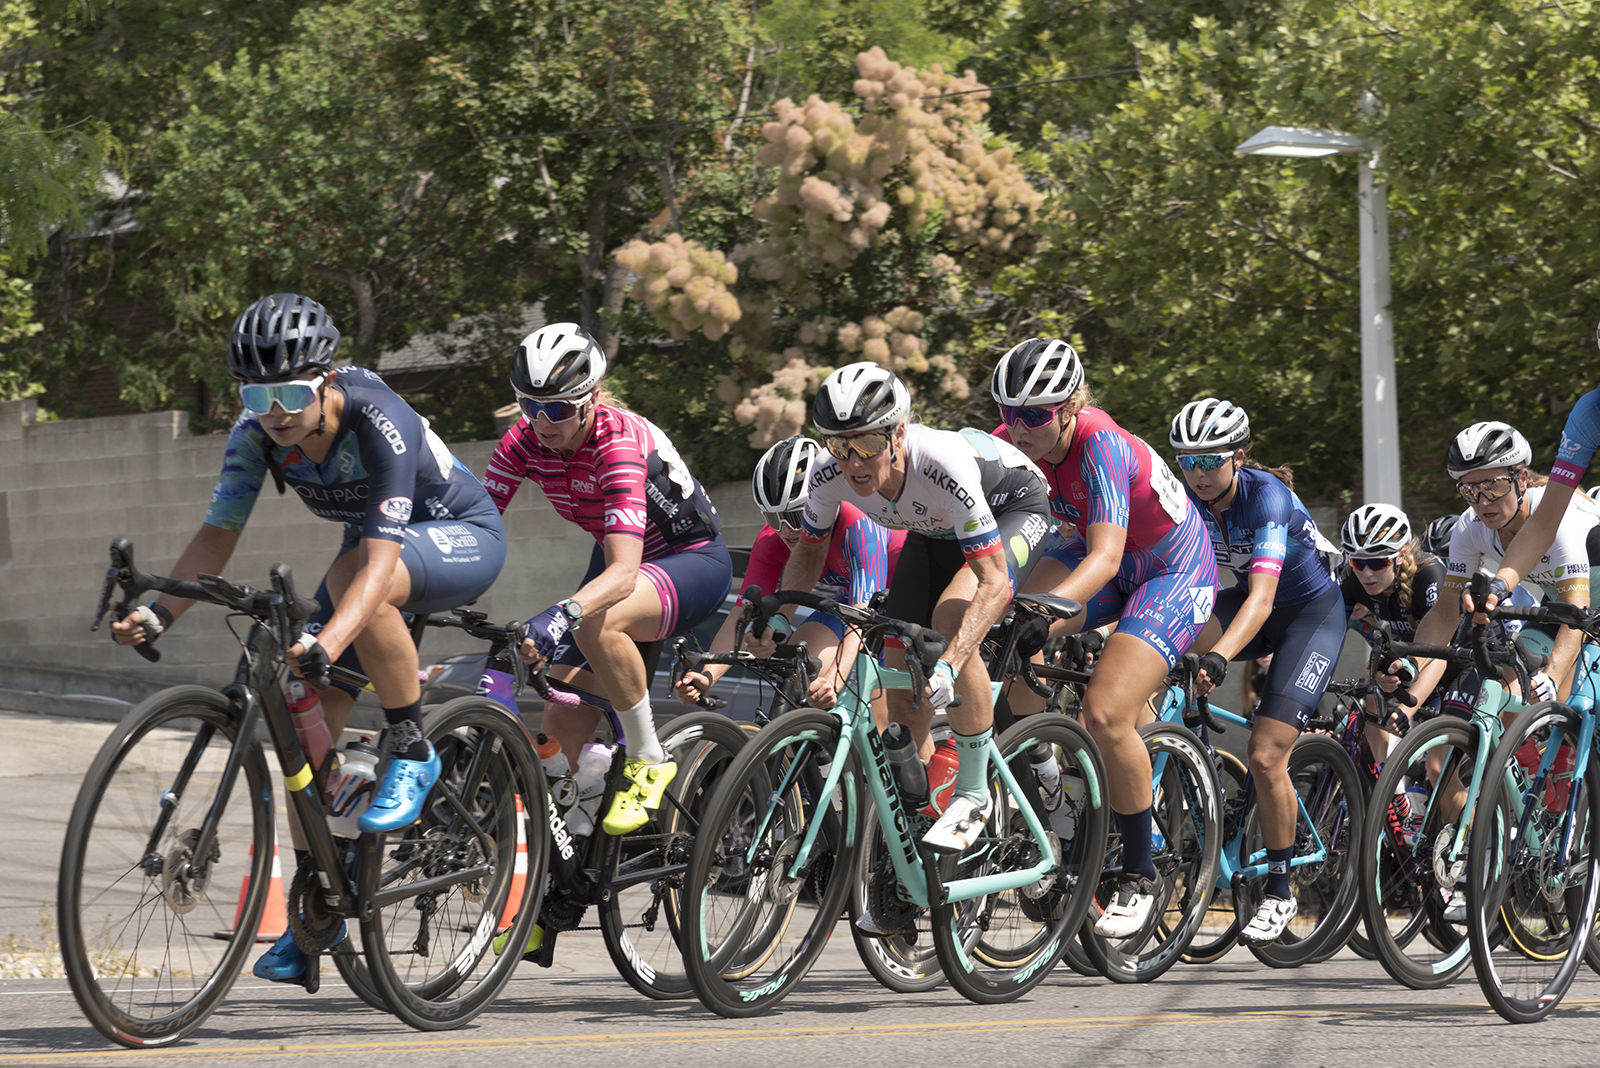 The Pro women charging hard up 2300 East at the Holladay Criterium, July 18, 2021 (Day 2 of the Salt Lake Criterium weekend). Photo by Steven L. Sheffield.